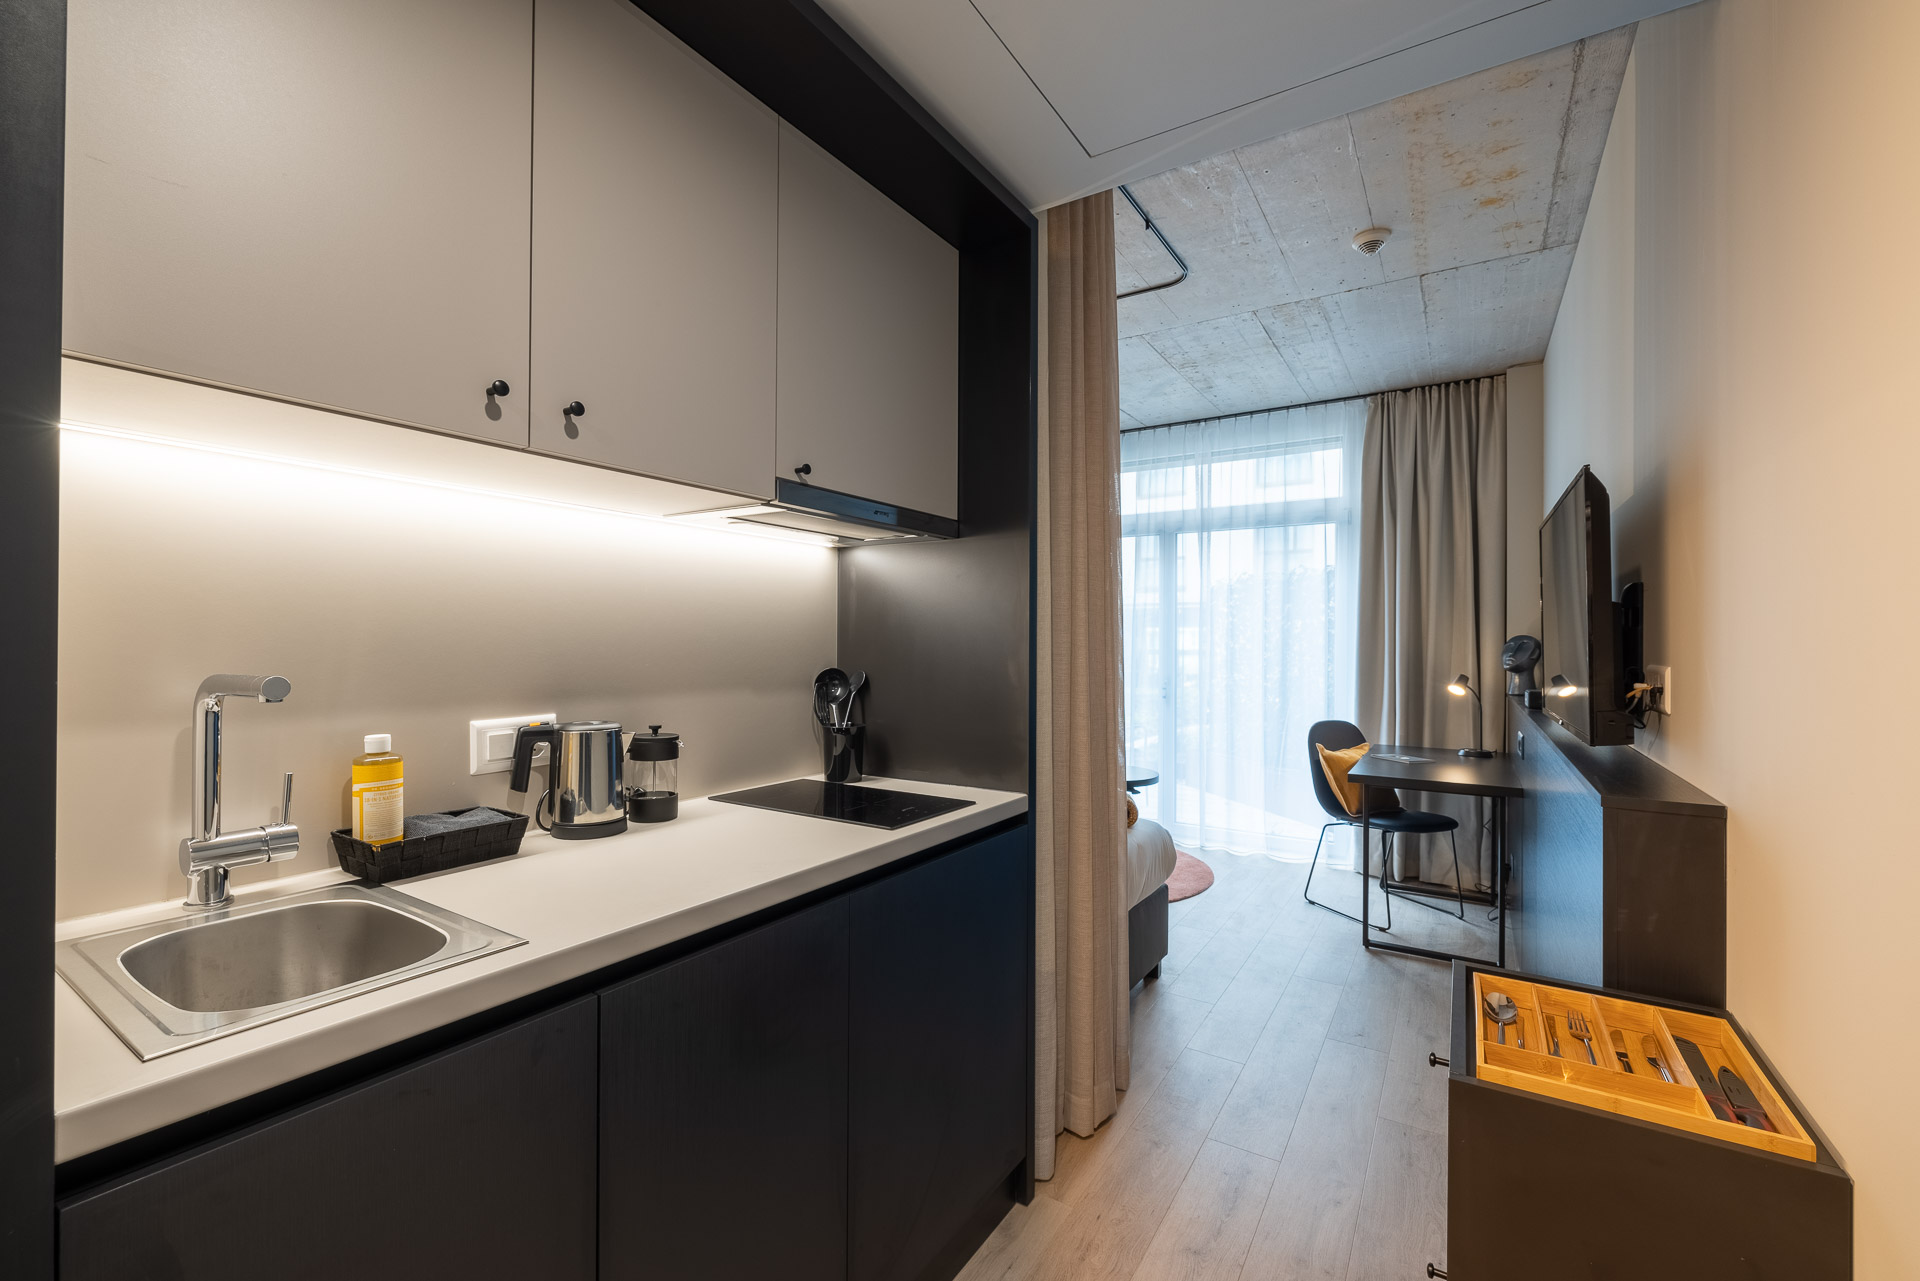 A kitchenette in the Apartment Smart+ for temporary living in Zurich